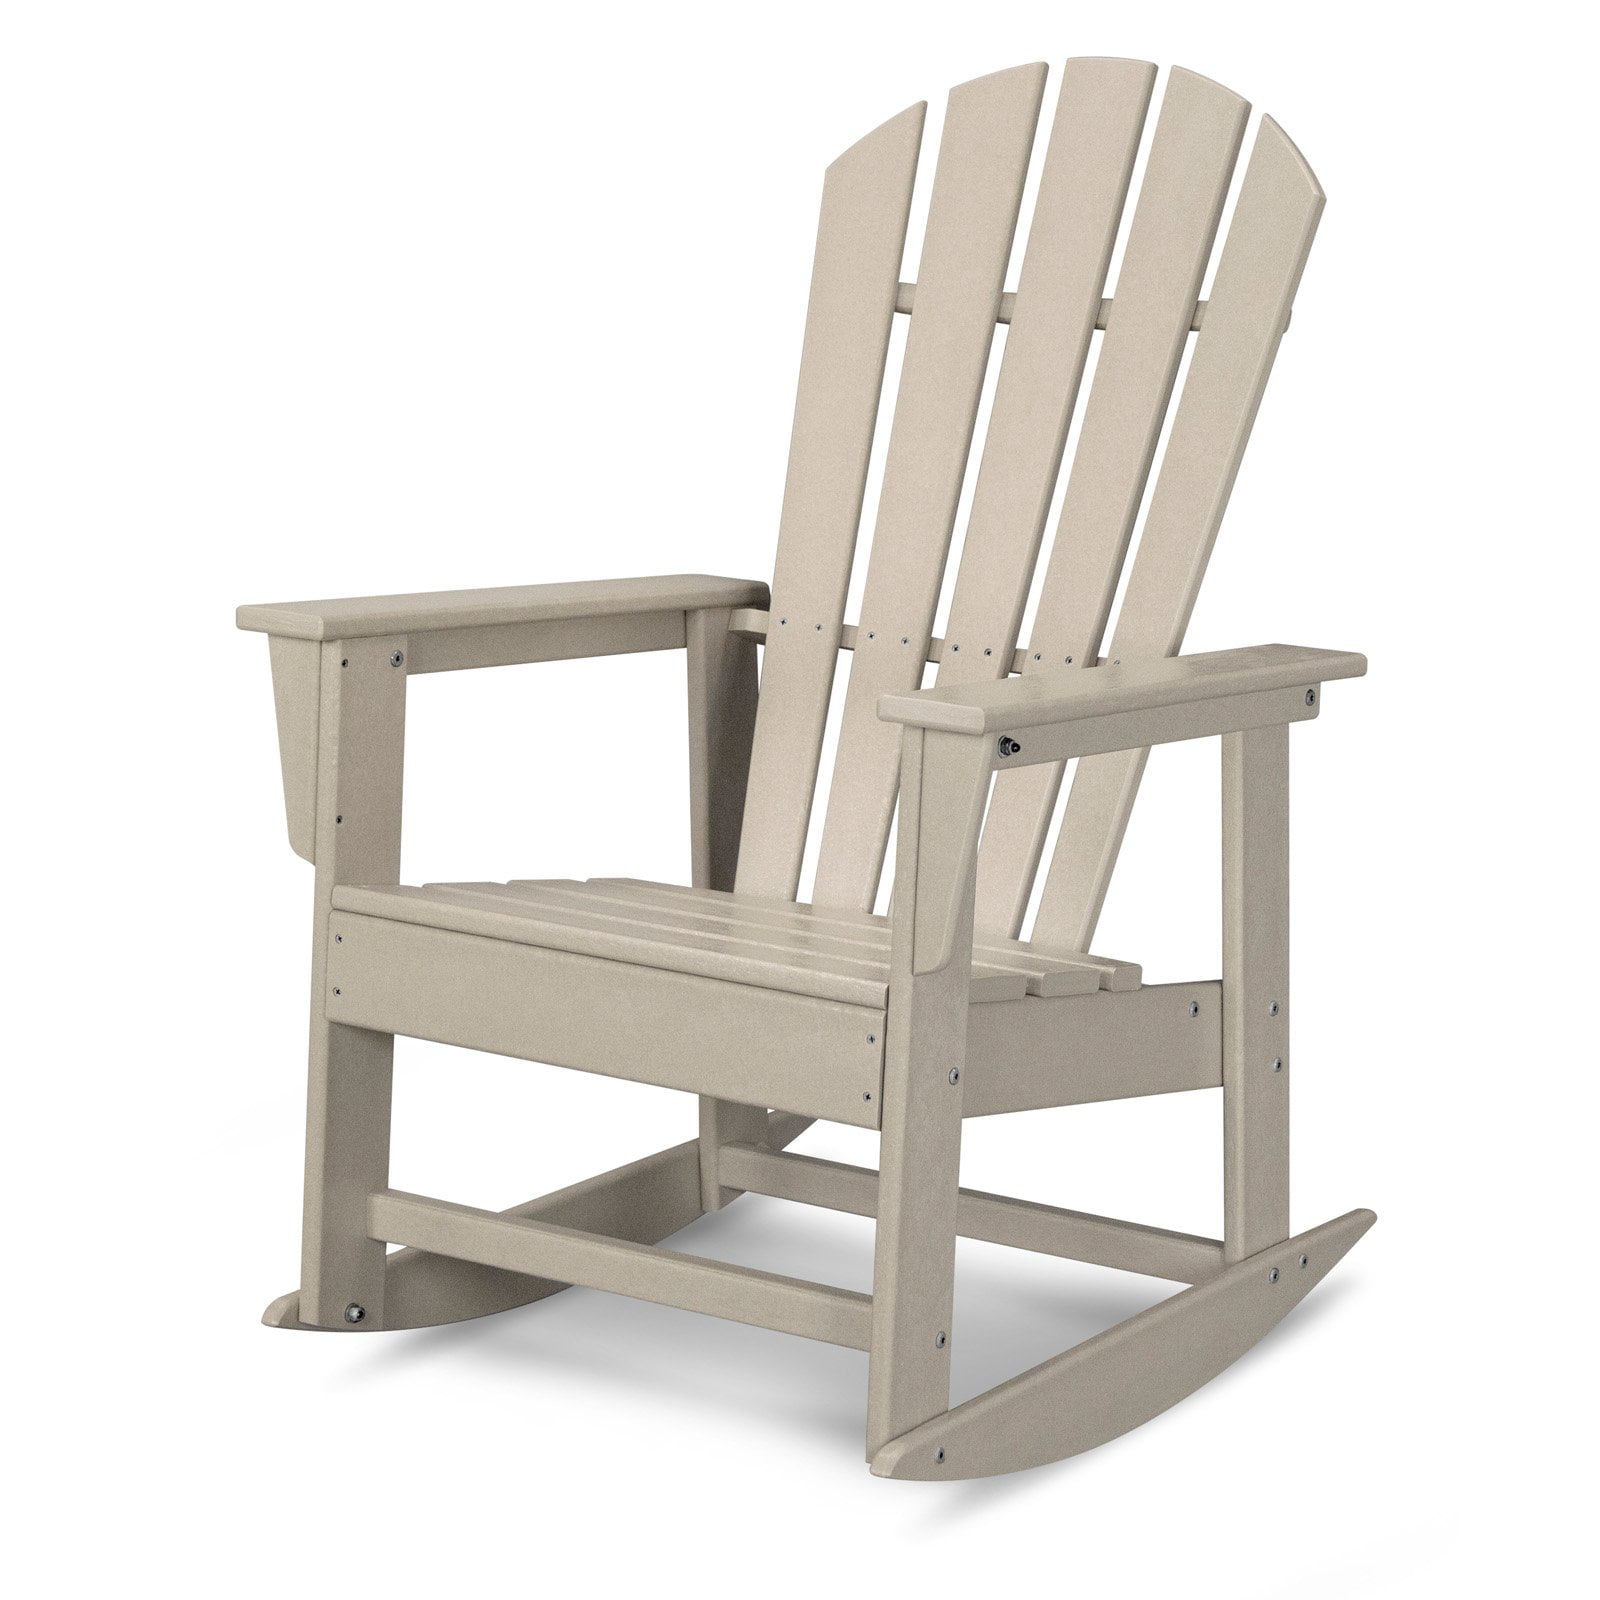 POLYWOOD® South Beach Recycled Plastic Adirondack Rocking Chair